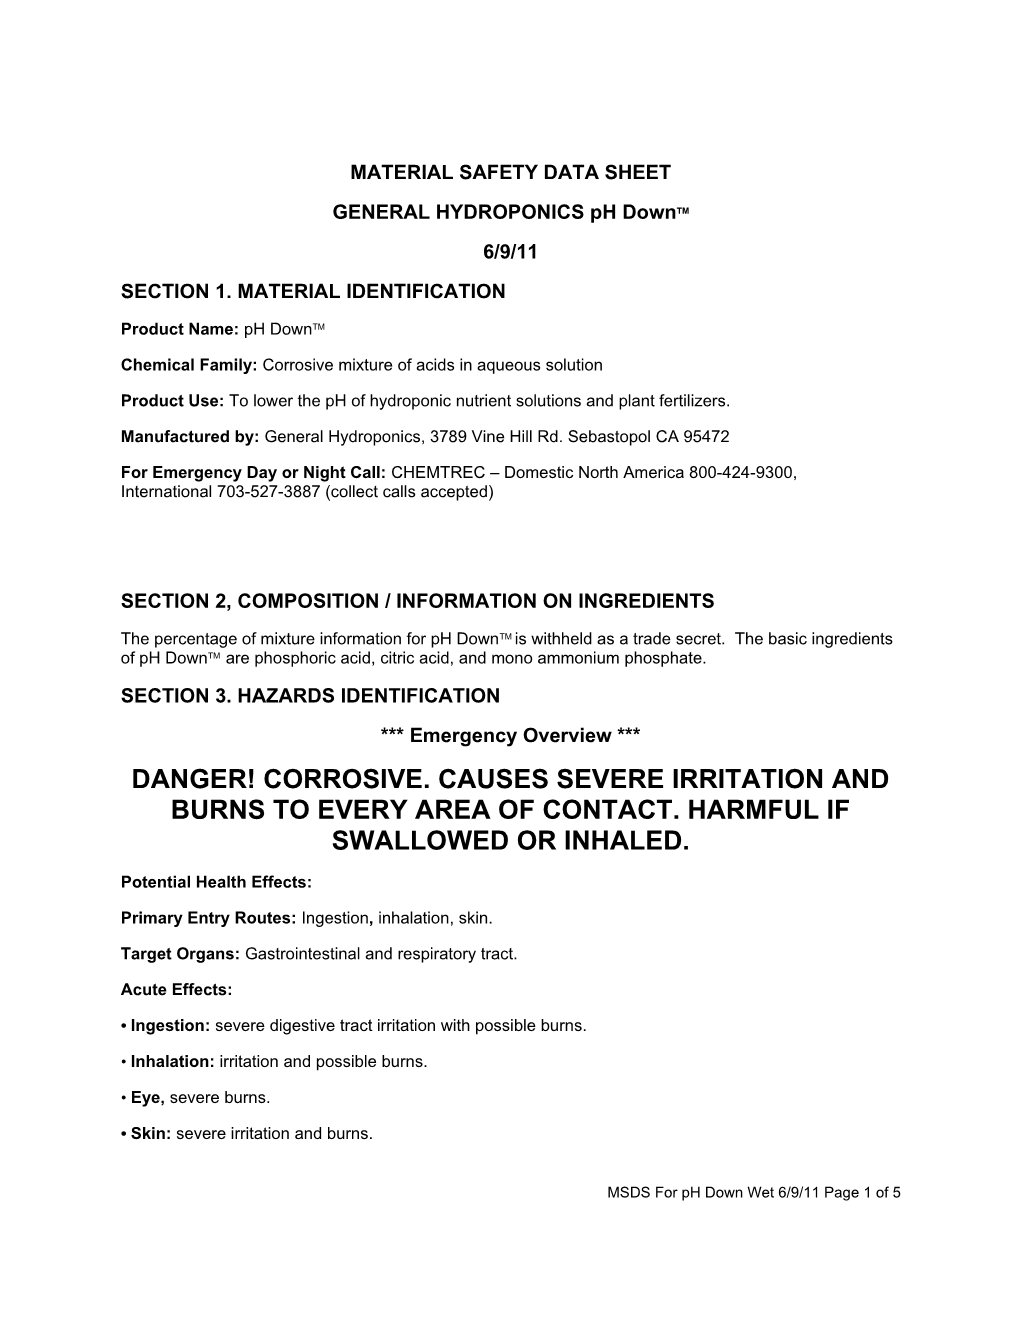 Material Safety Data Sheet s36